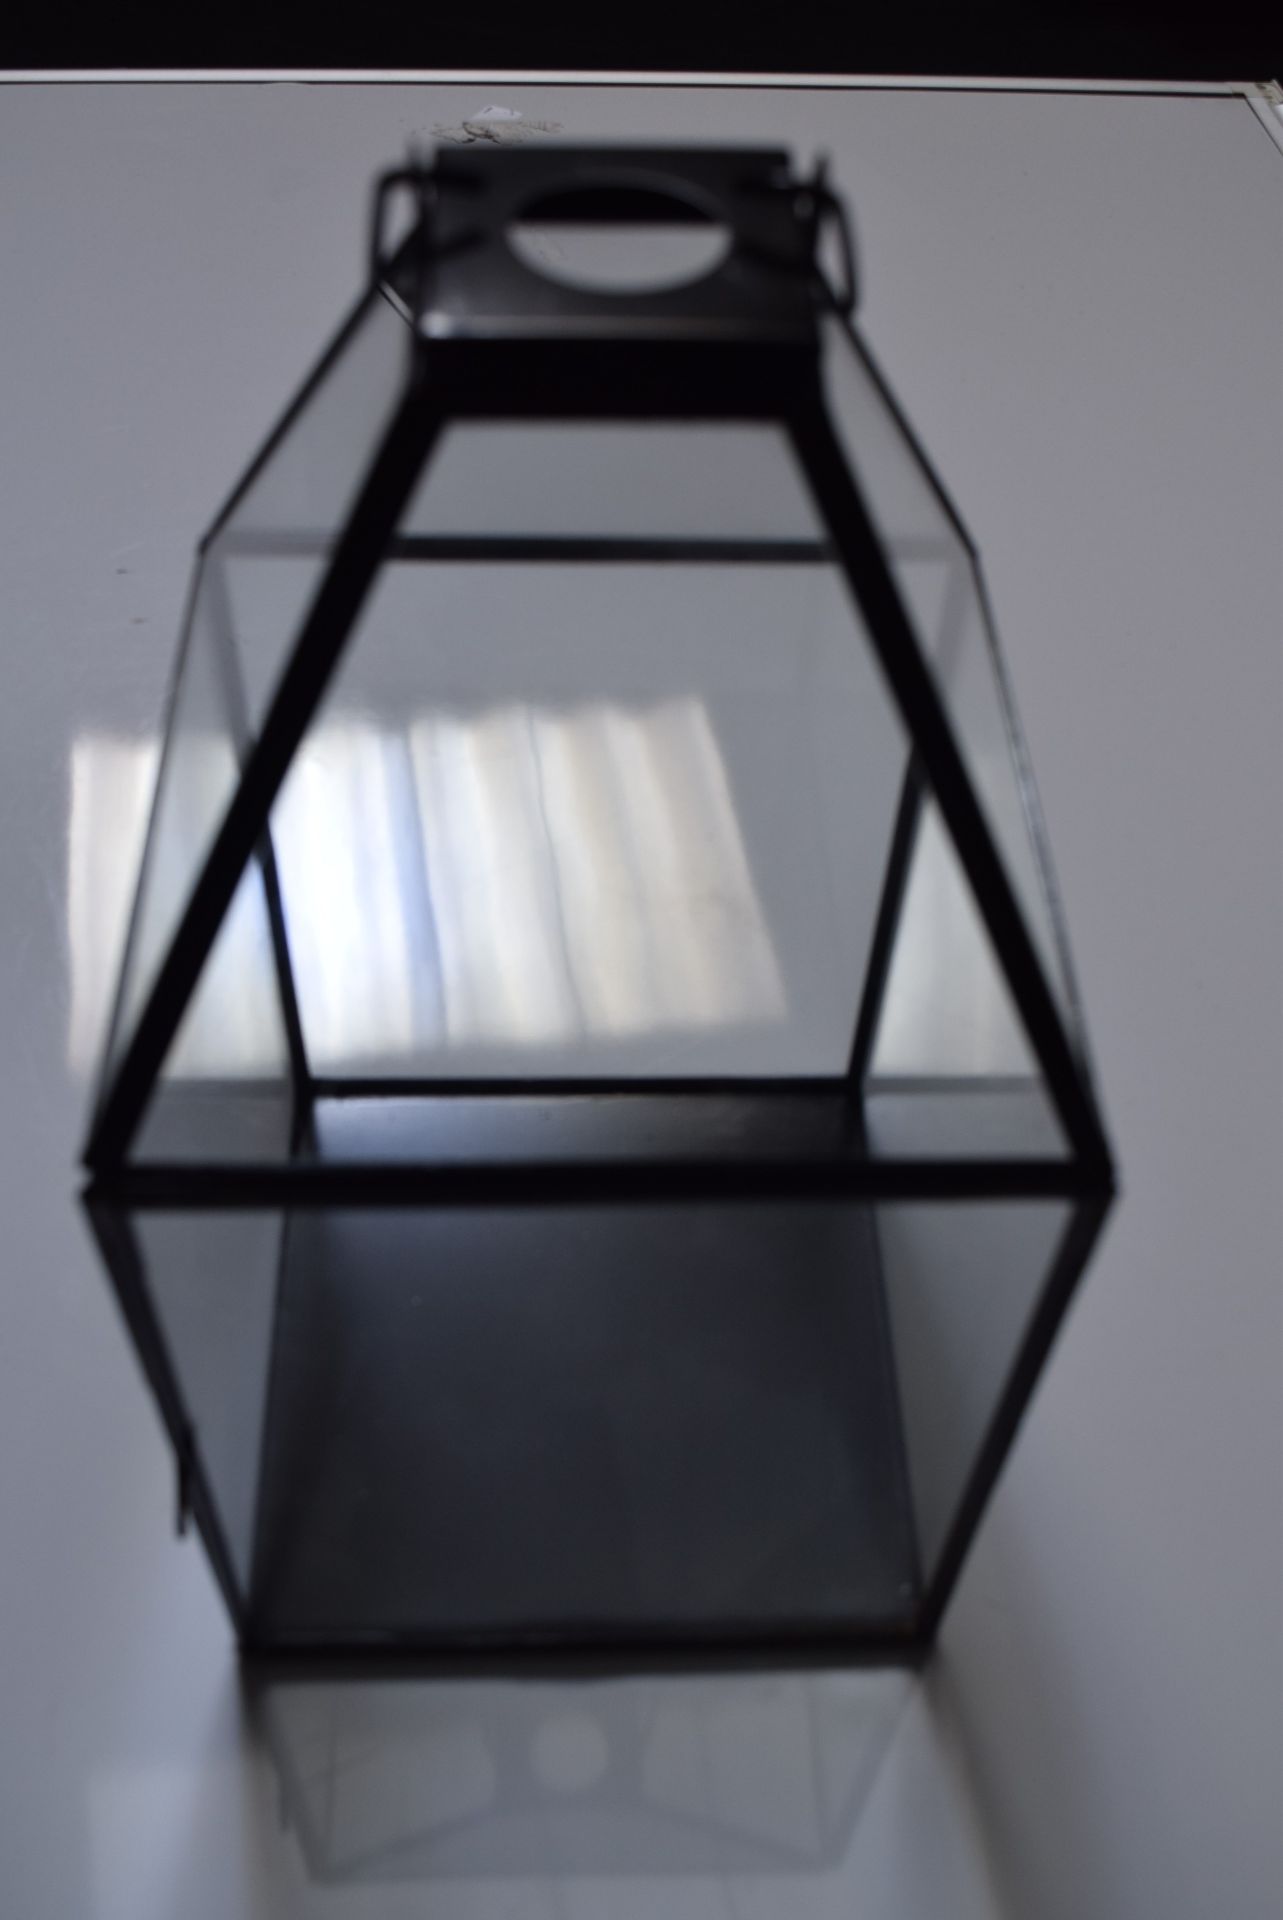 1 X BOXED UNUSED WR METAL AND GLASS LANTERN IN BLACK 18X18X34CM